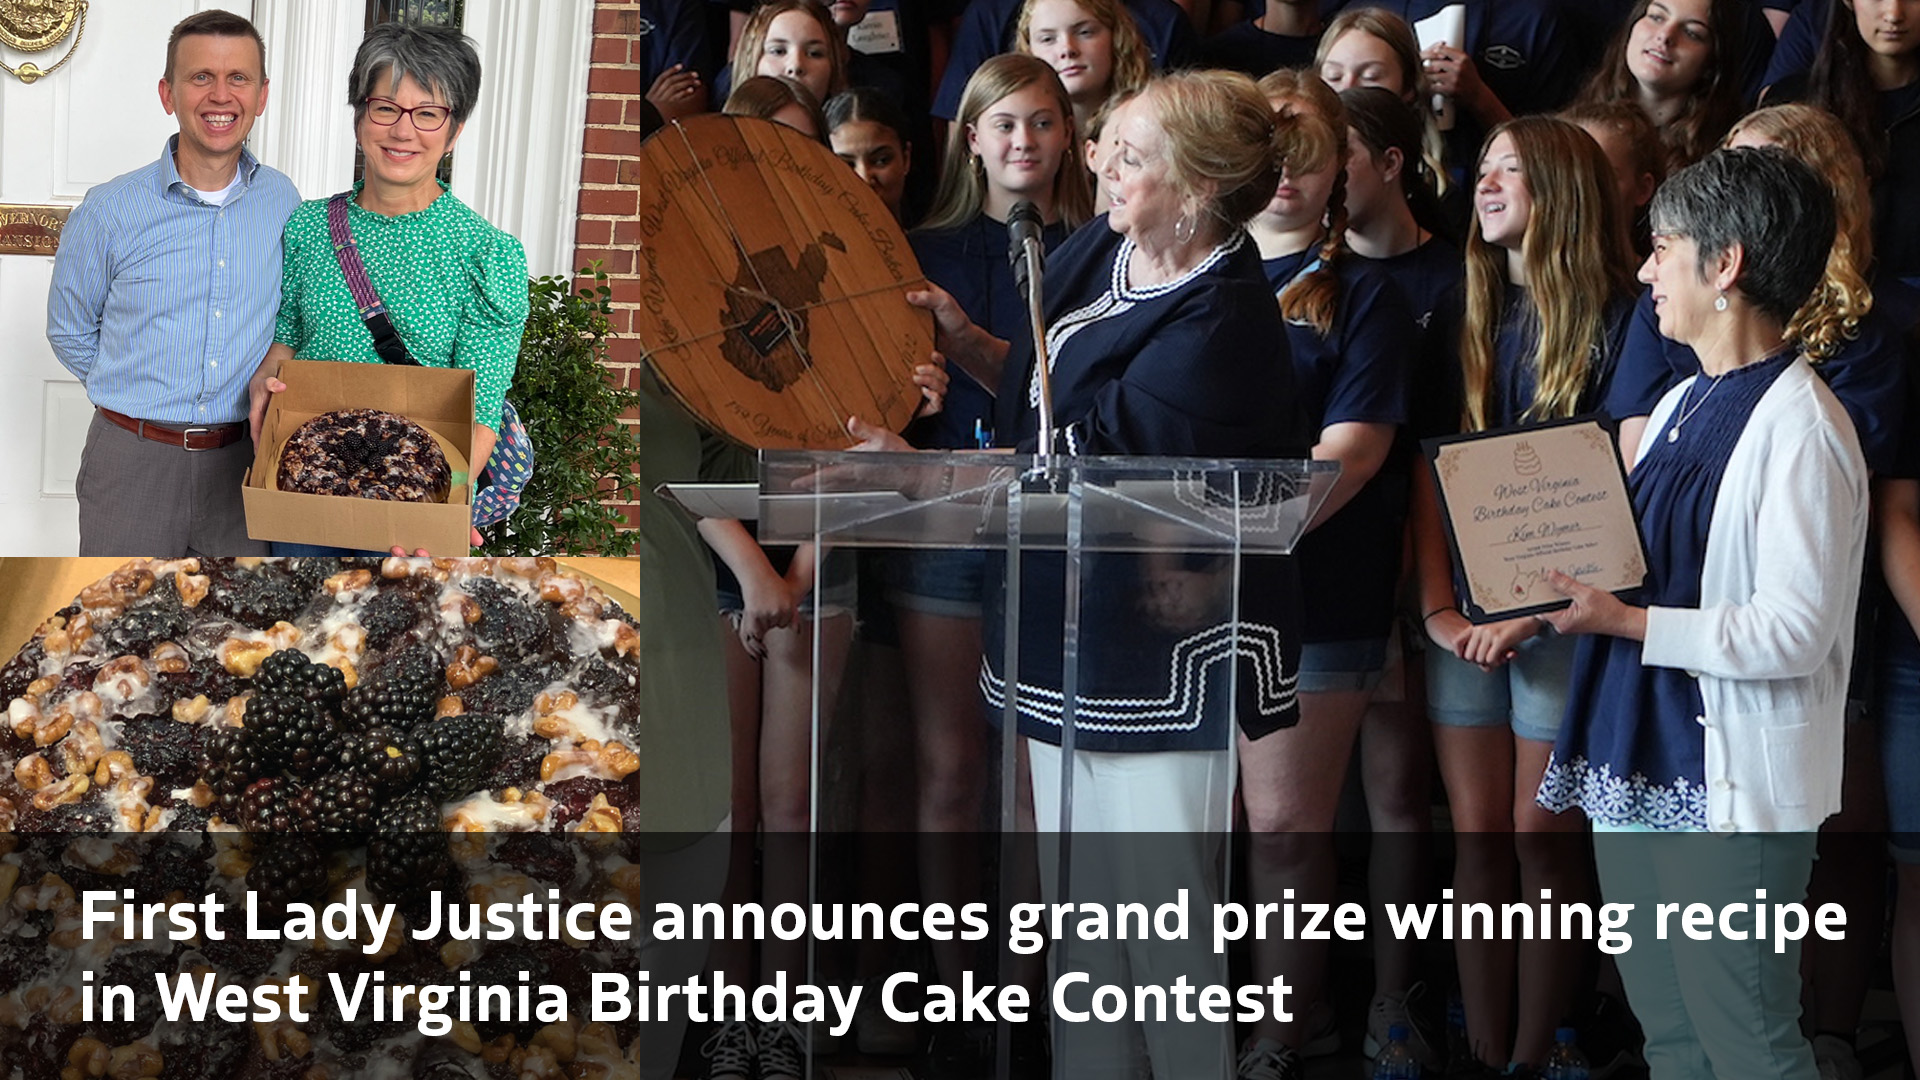 First Lady Justice announces grand prize winning recipe in West Virginia Birthday Cake Contest